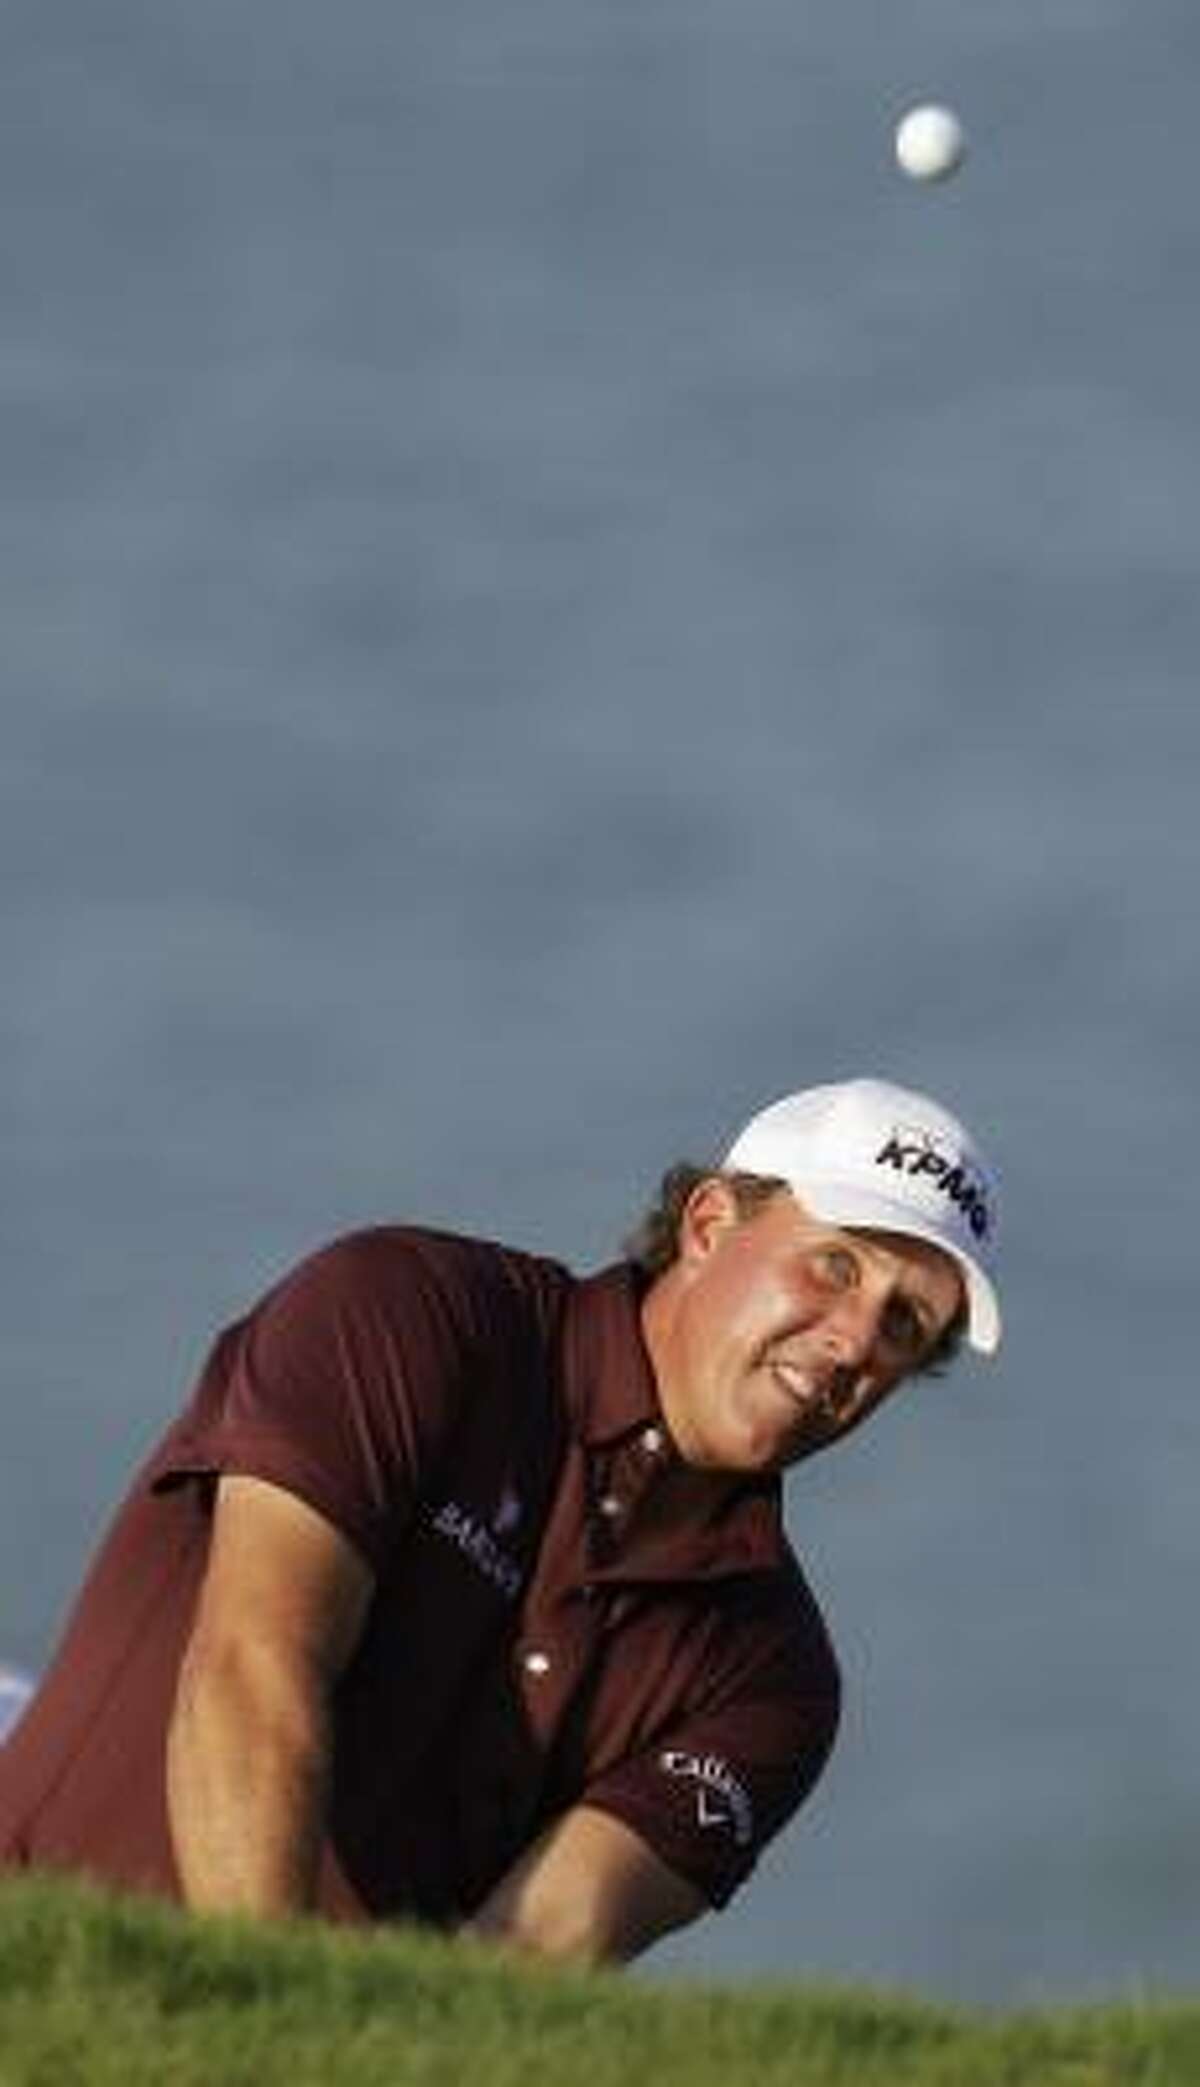 Phil Mickelson hits out of a bunker on the fourth hole.